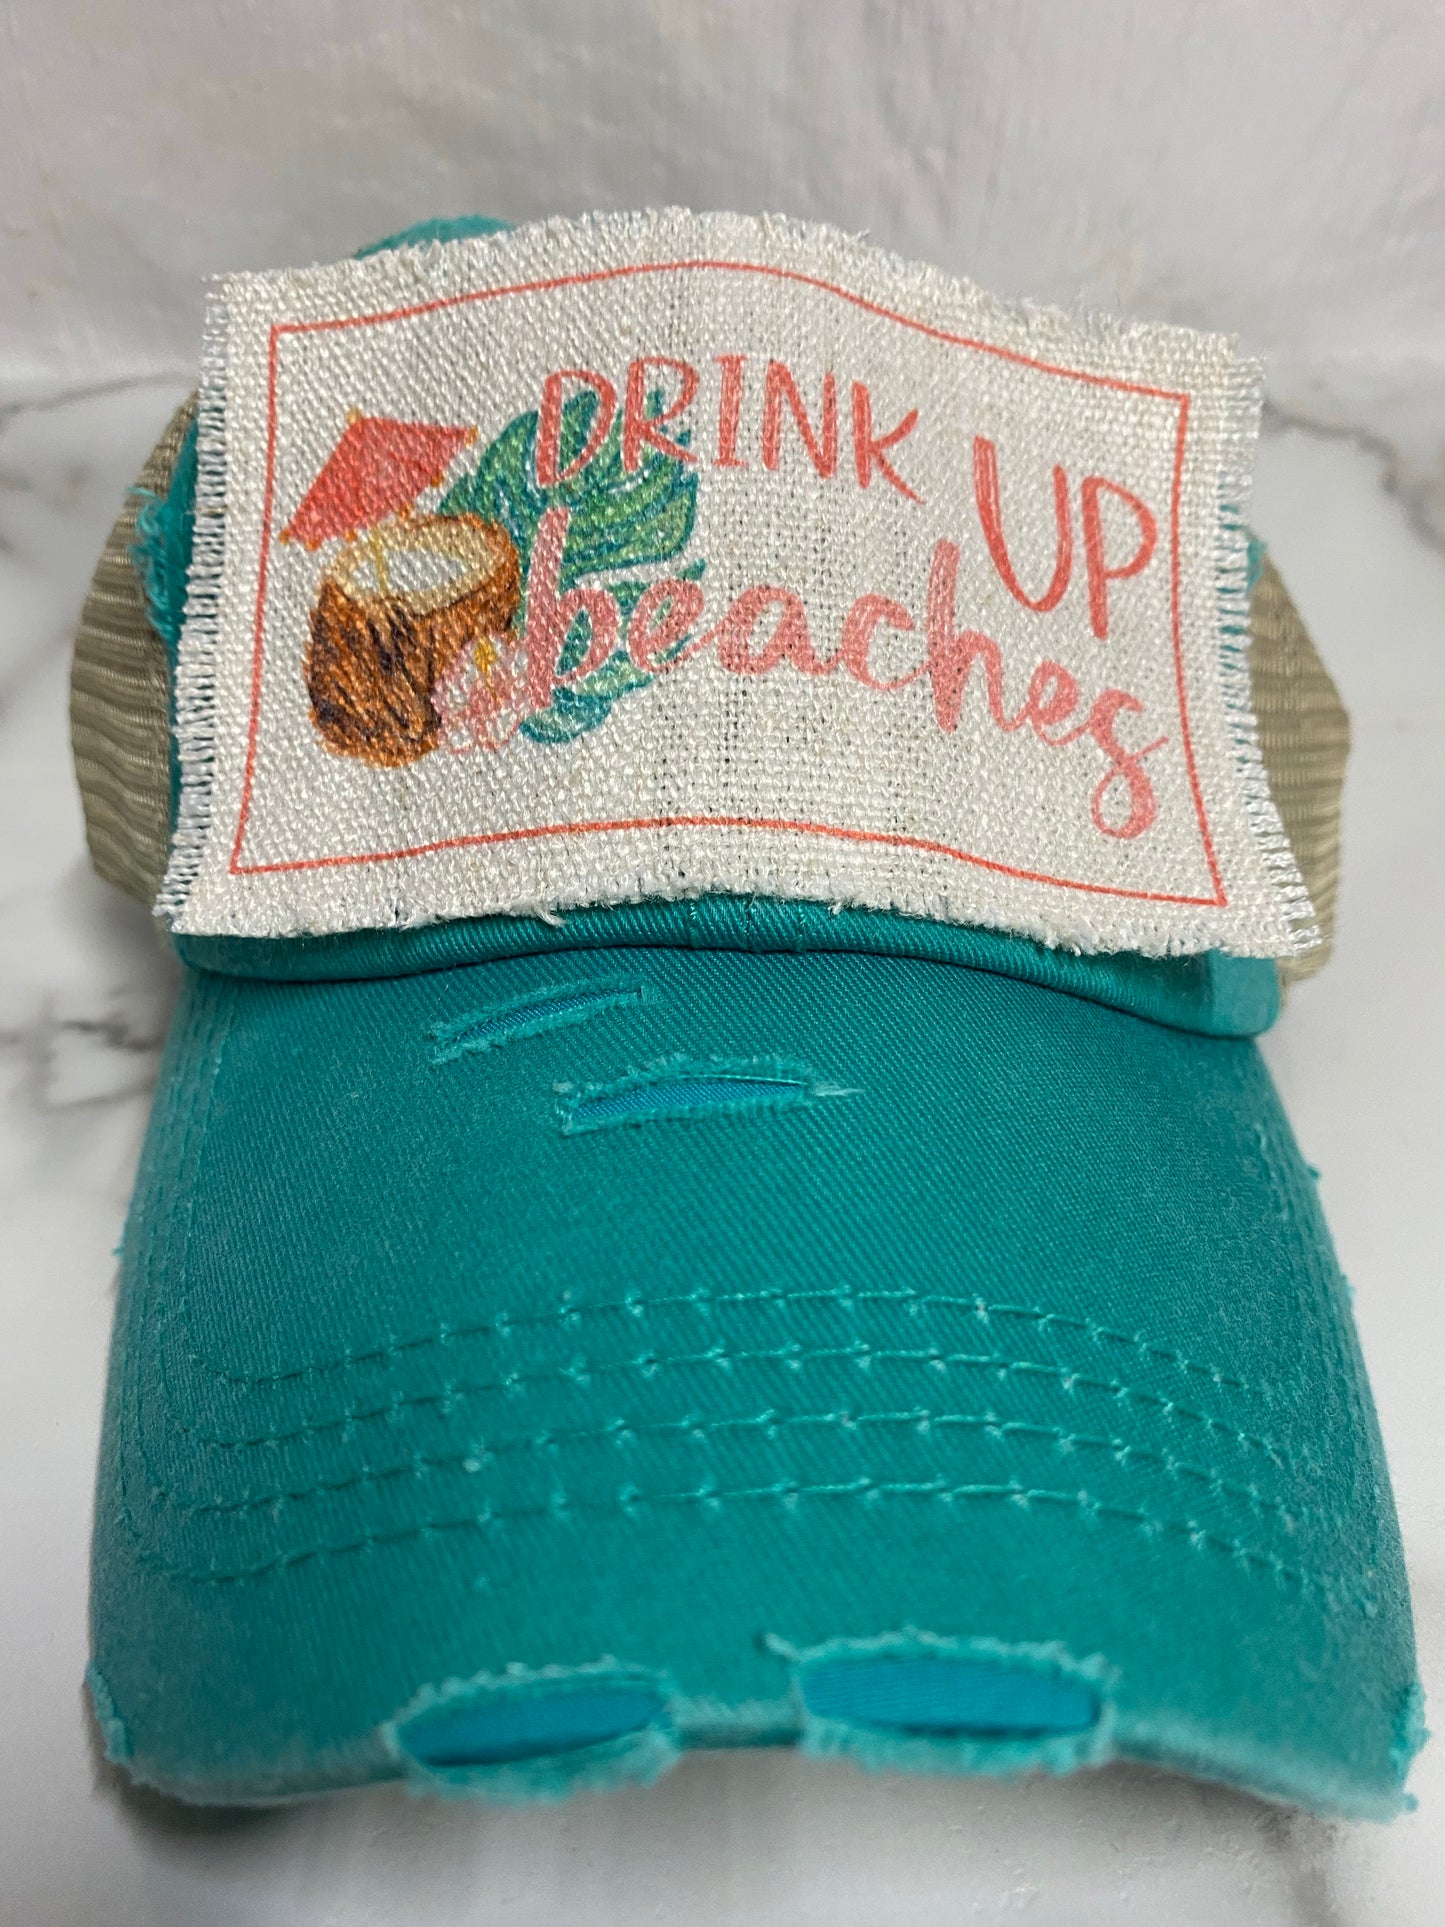 Drink up Beaches hat patch